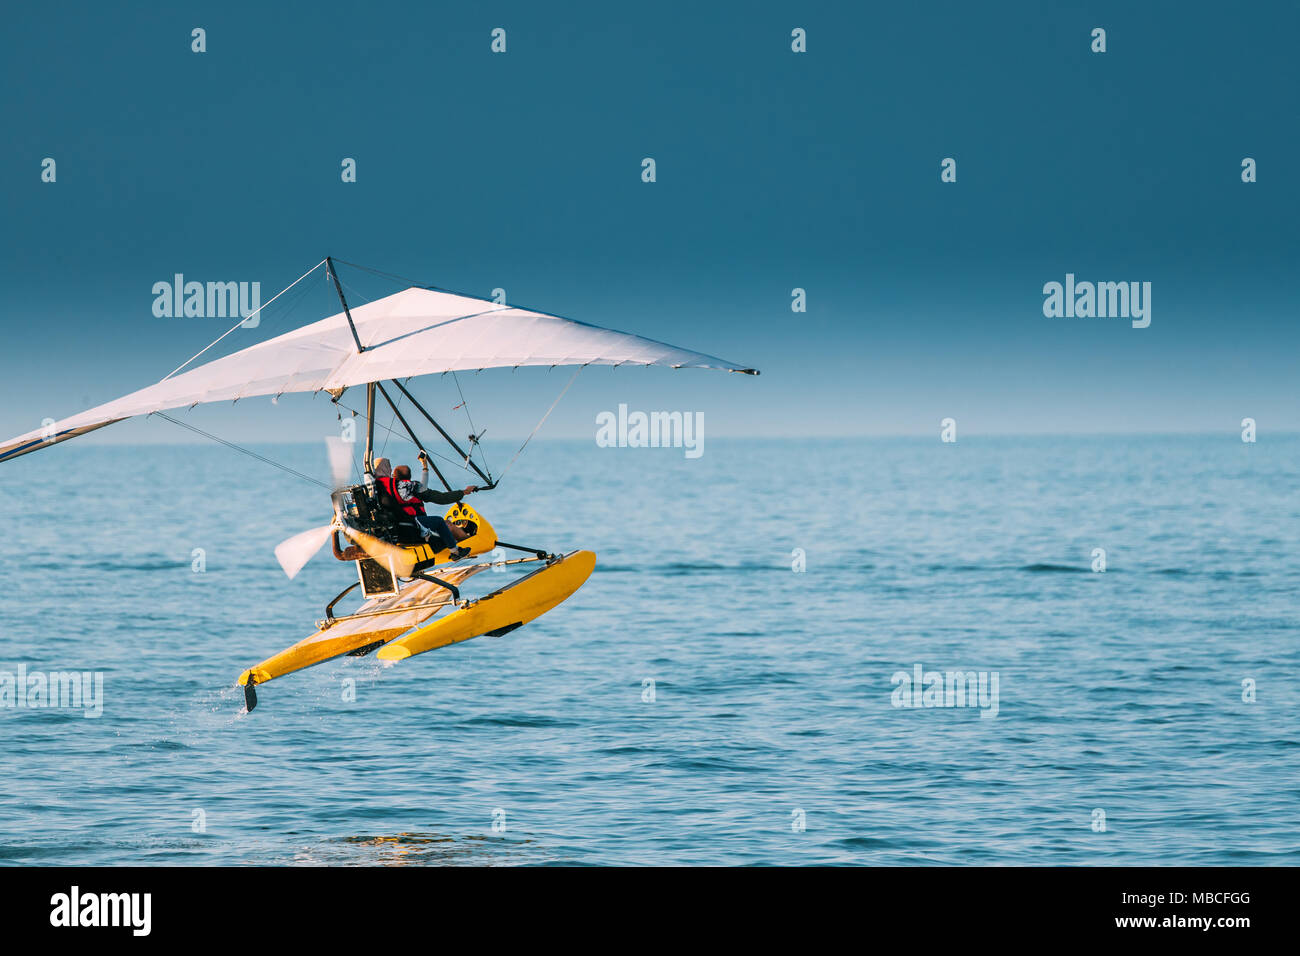 Motorized Hang Glider With Muslim Woman Take Off Frow Sea In Sunny Summer Day. Muslim People Having Fun Stock Photo